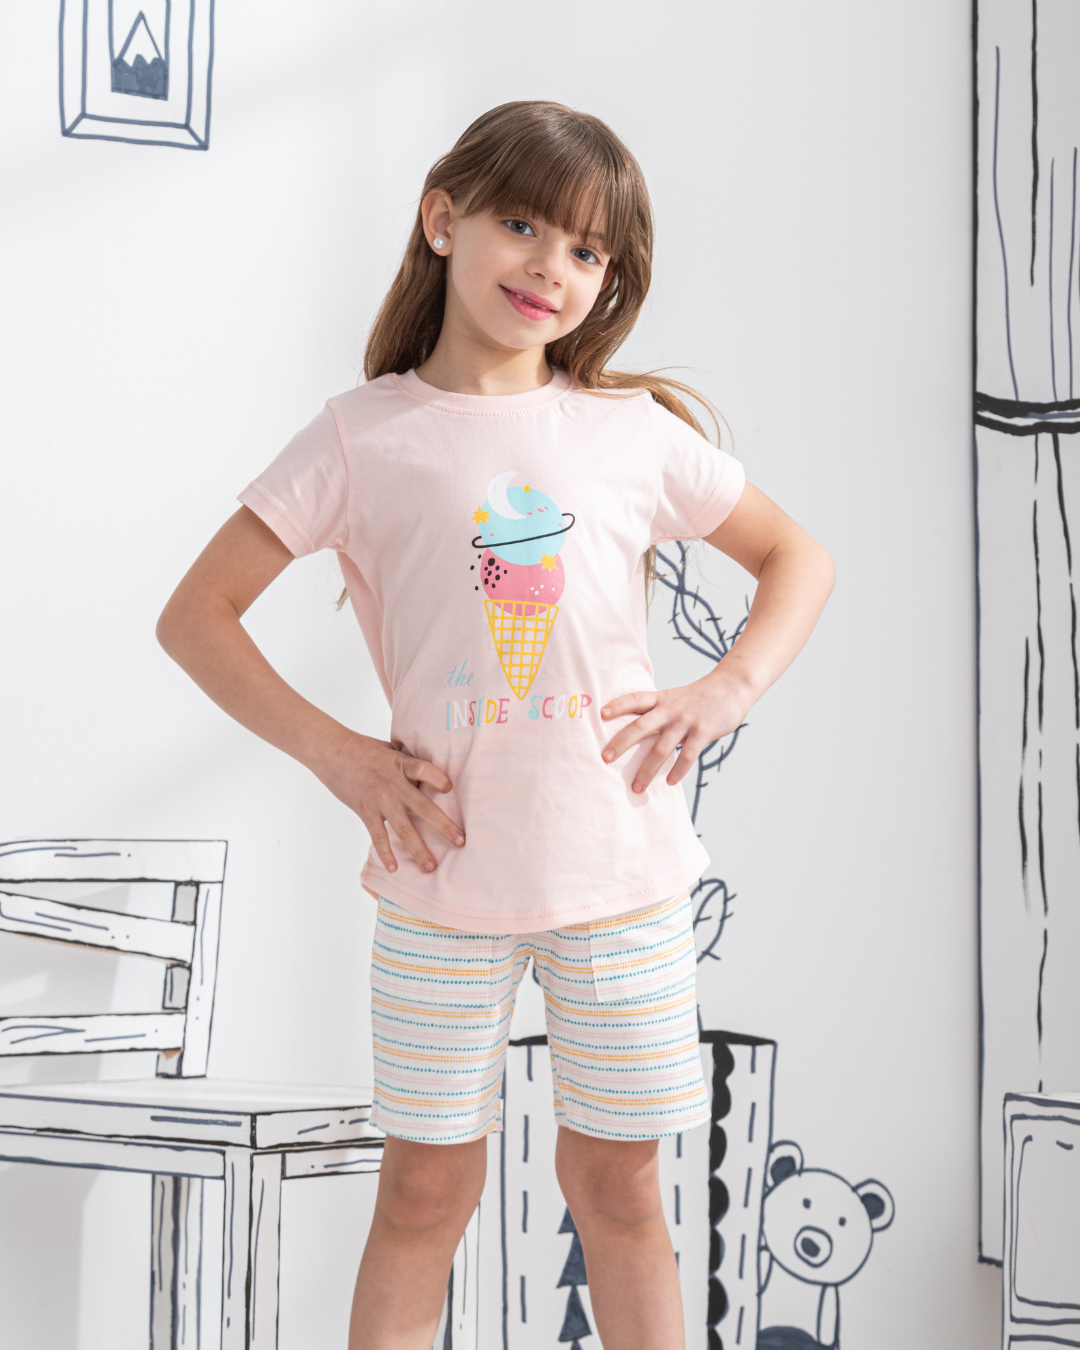 The inside scoop Girls' half-sleeved pajamas and cotton shorts